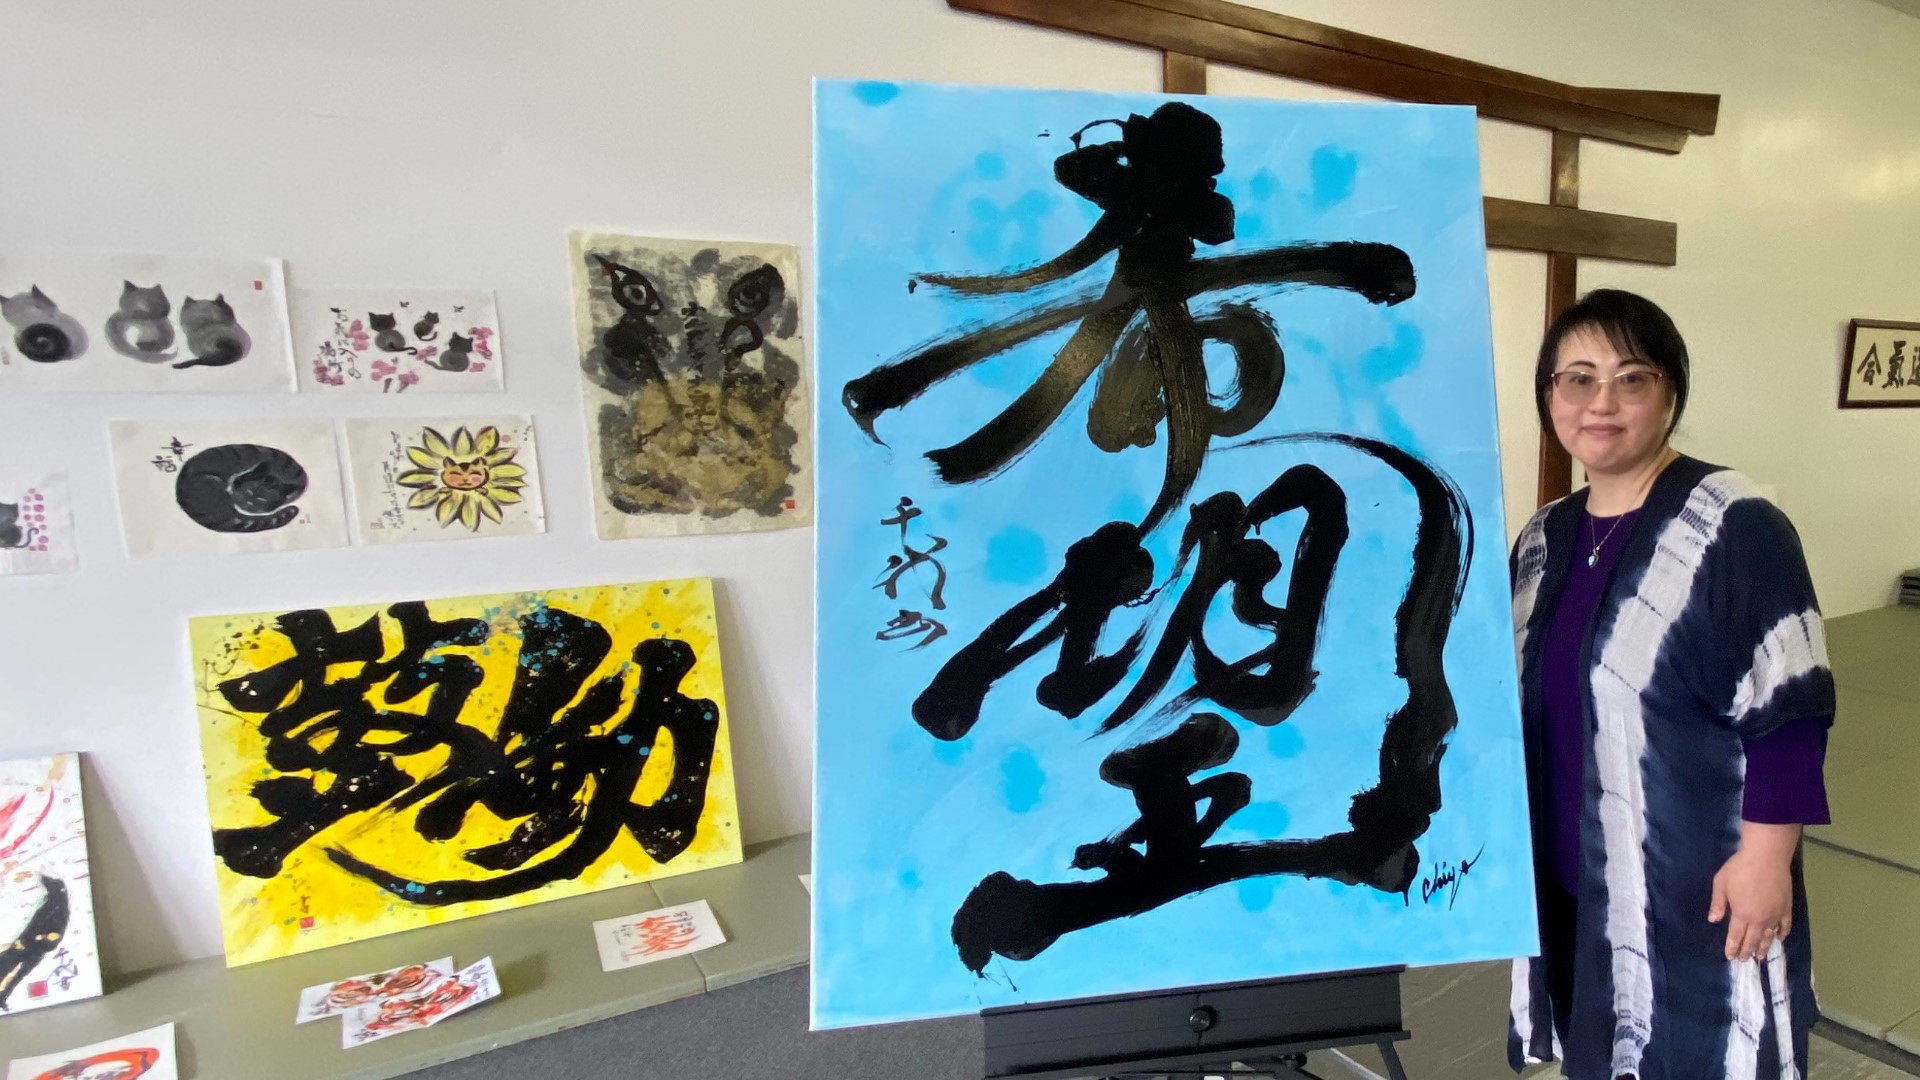 Even if you can't read Japanese, Chiyo Sanada's art tells a story. #k5evening